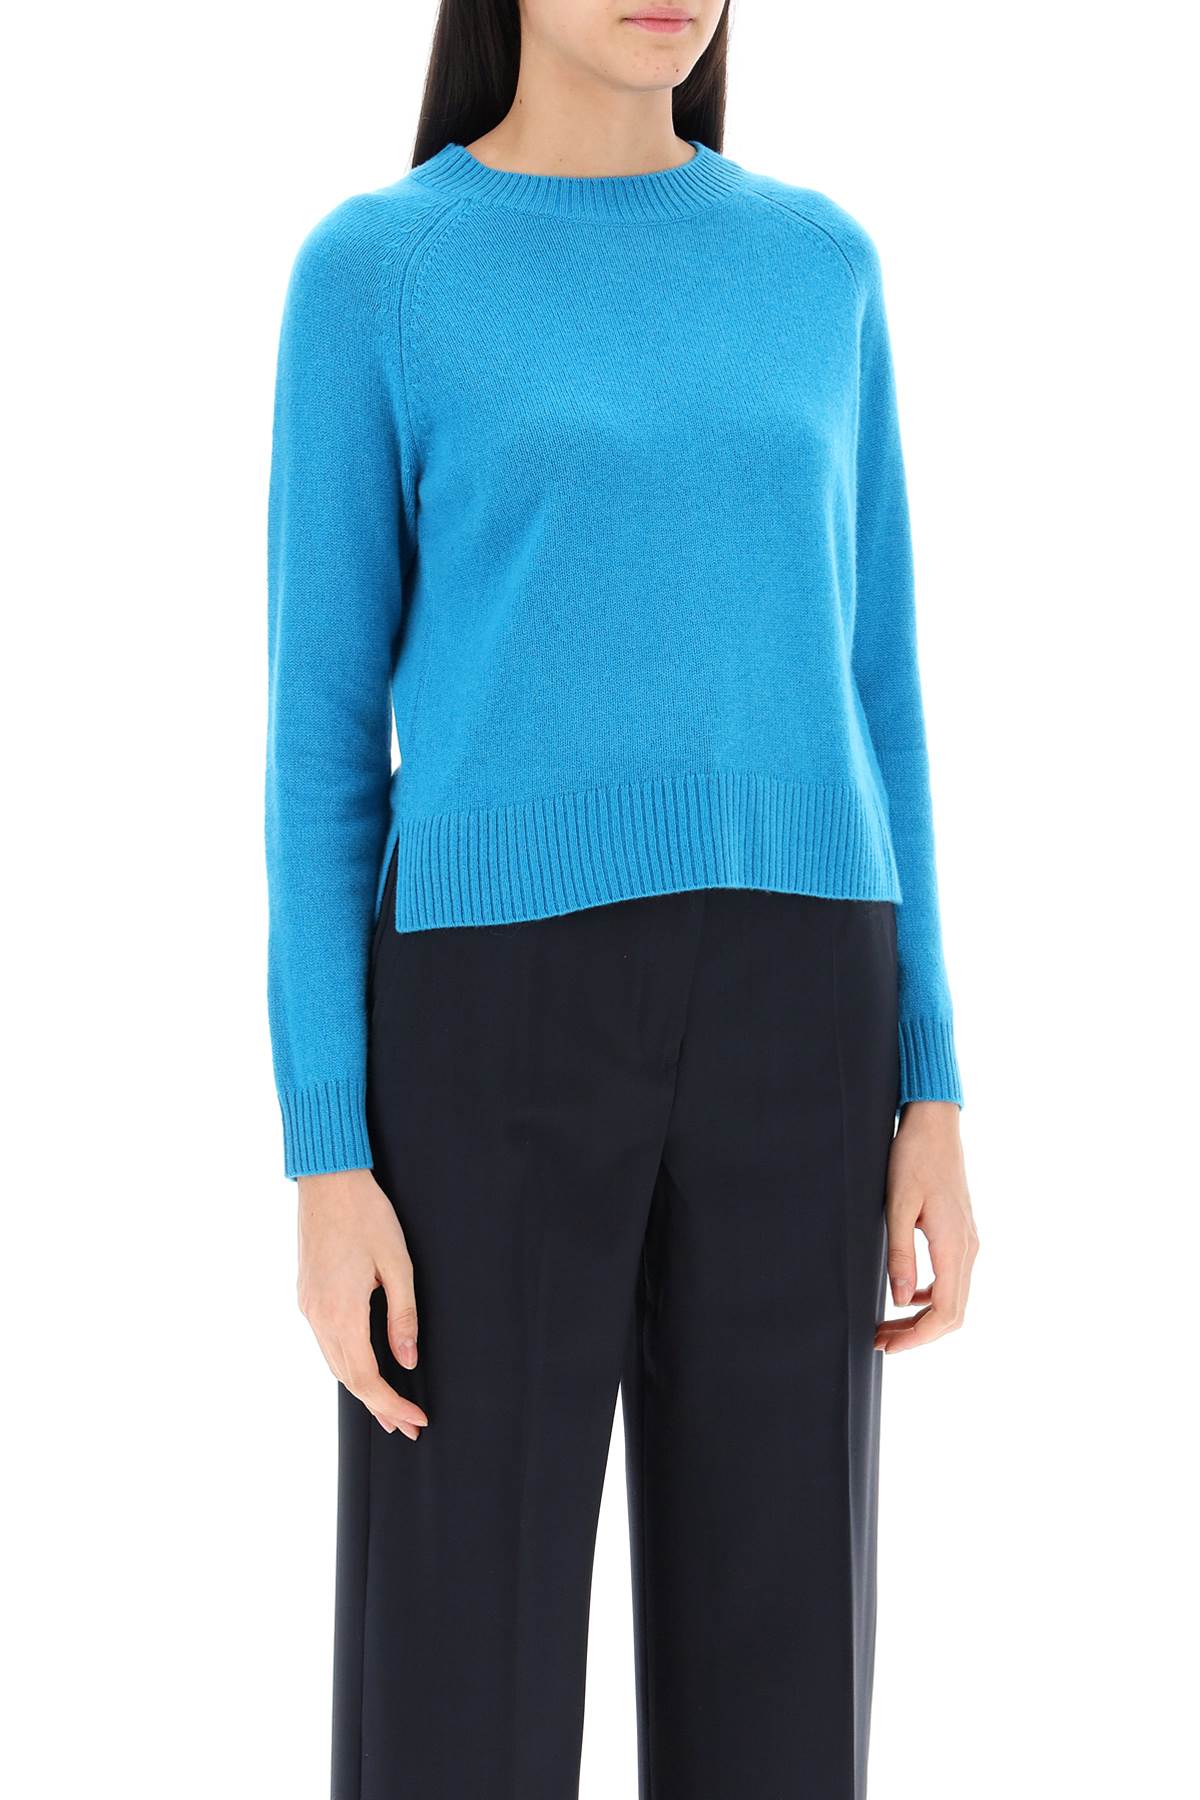 Shop Weekend Max Mara Scatola Cashmere Sweater In Light Blue